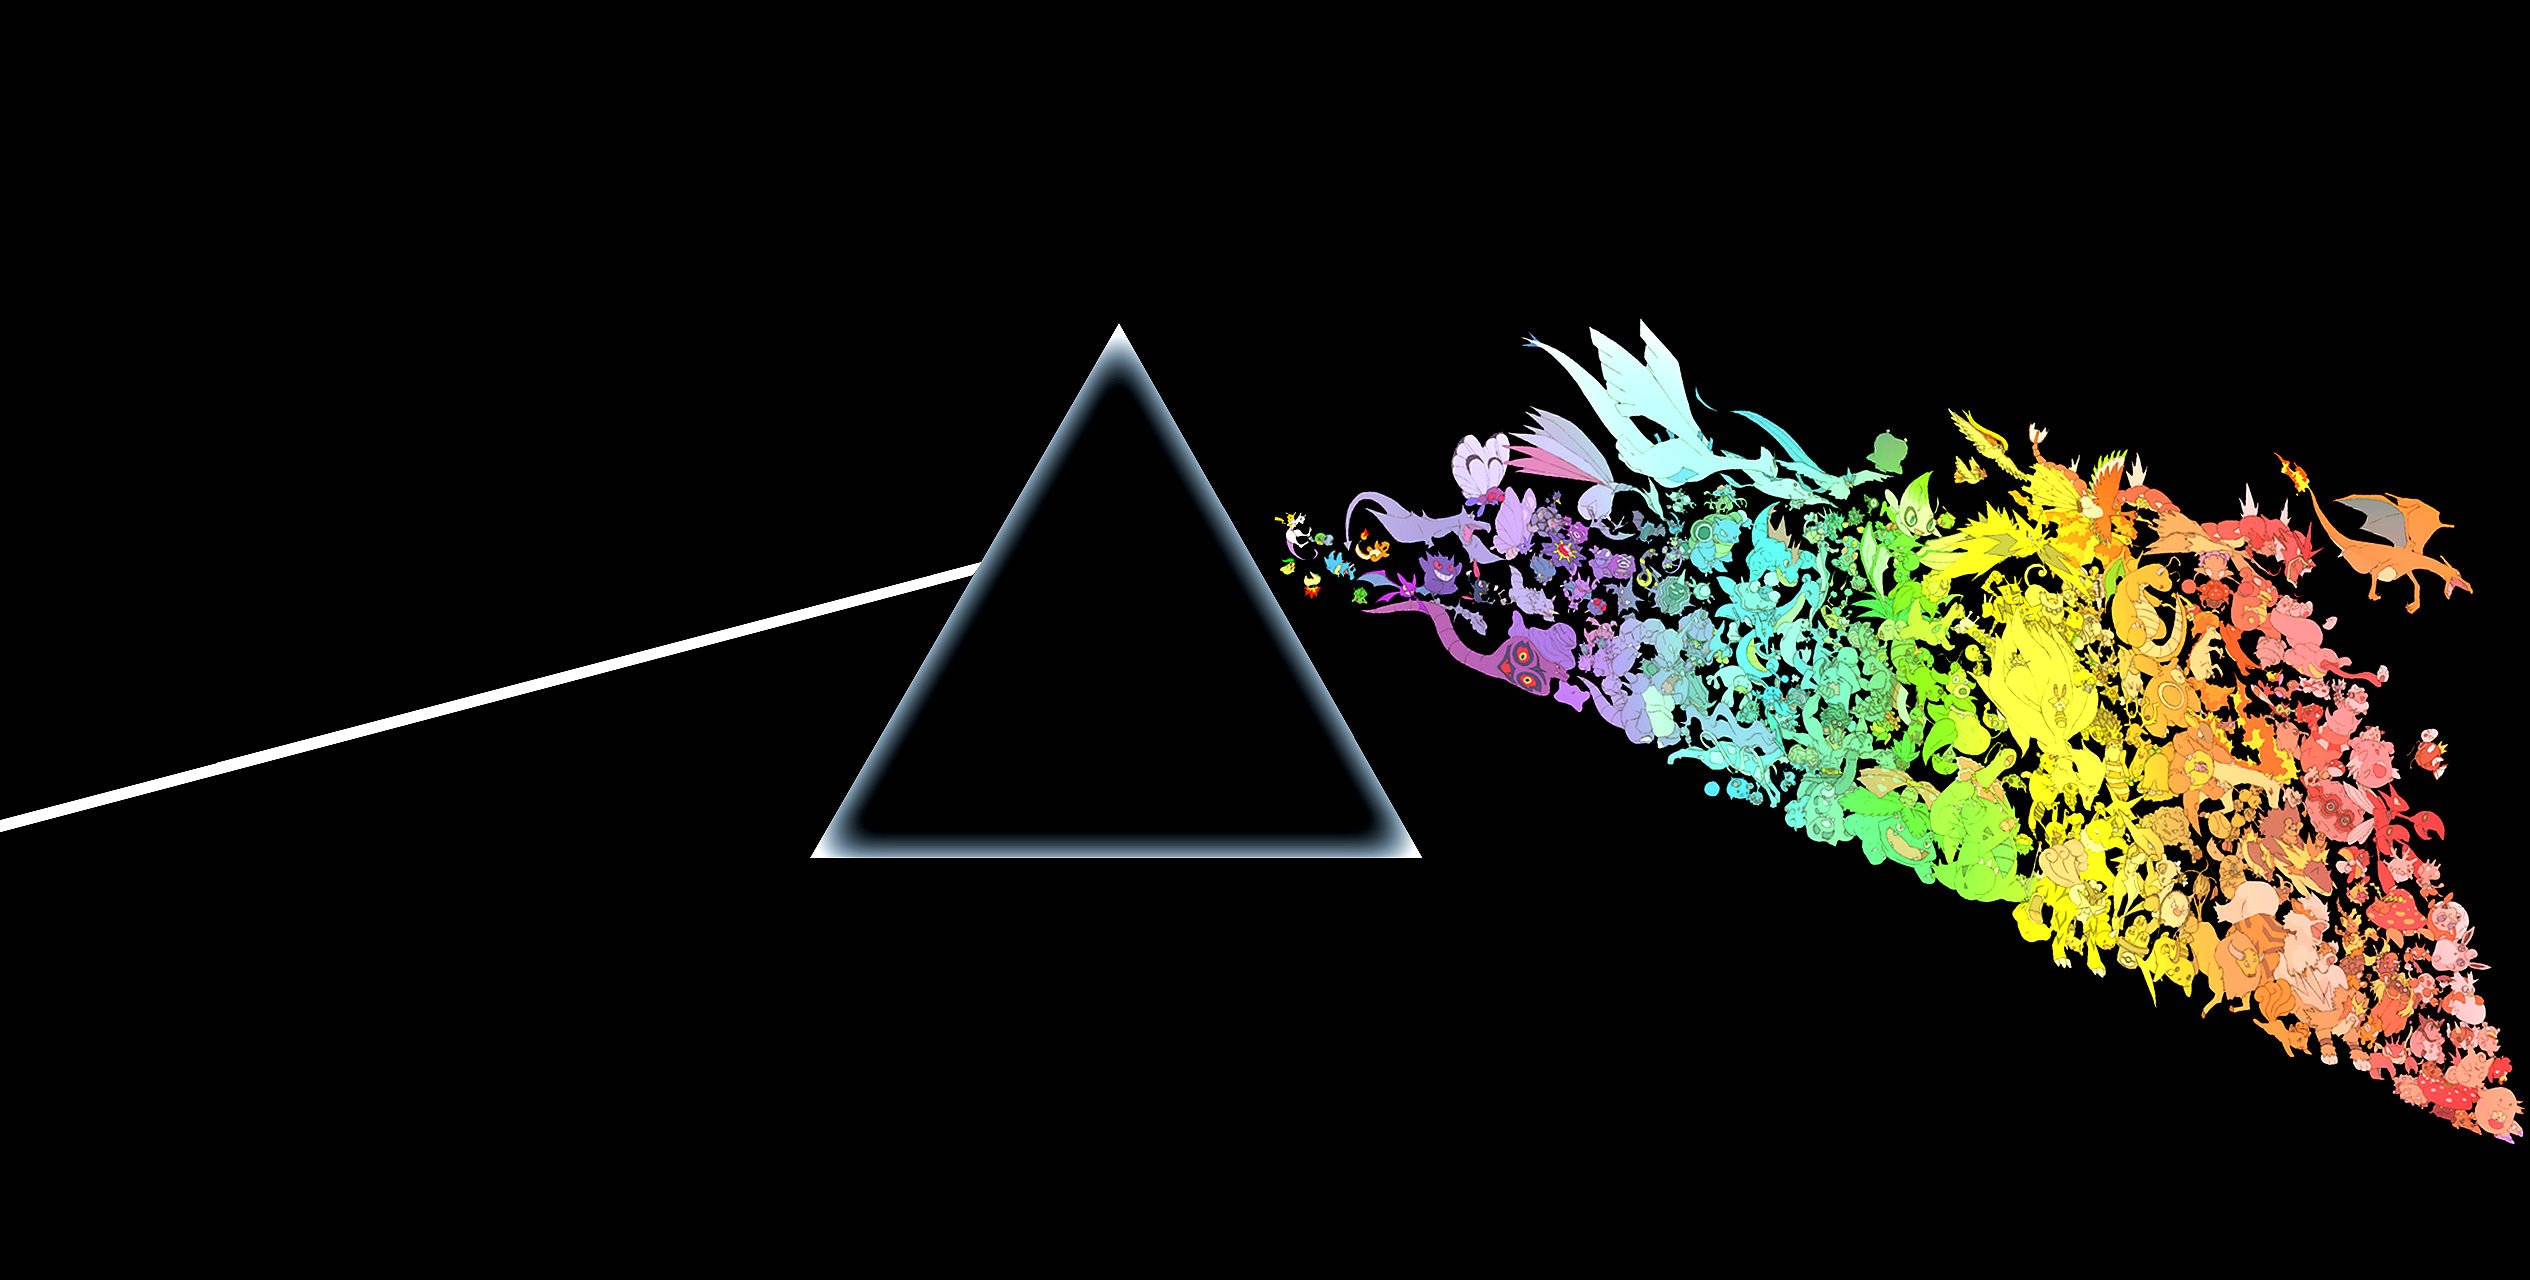 Wallpaper  triangle nebula eagle Pink Floyd universe The Dark Side of  the Moon darkness screenshot computer wallpaper special effects outer  space 3840x2400  alex93s  162929  HD Wallpapers  WallHere